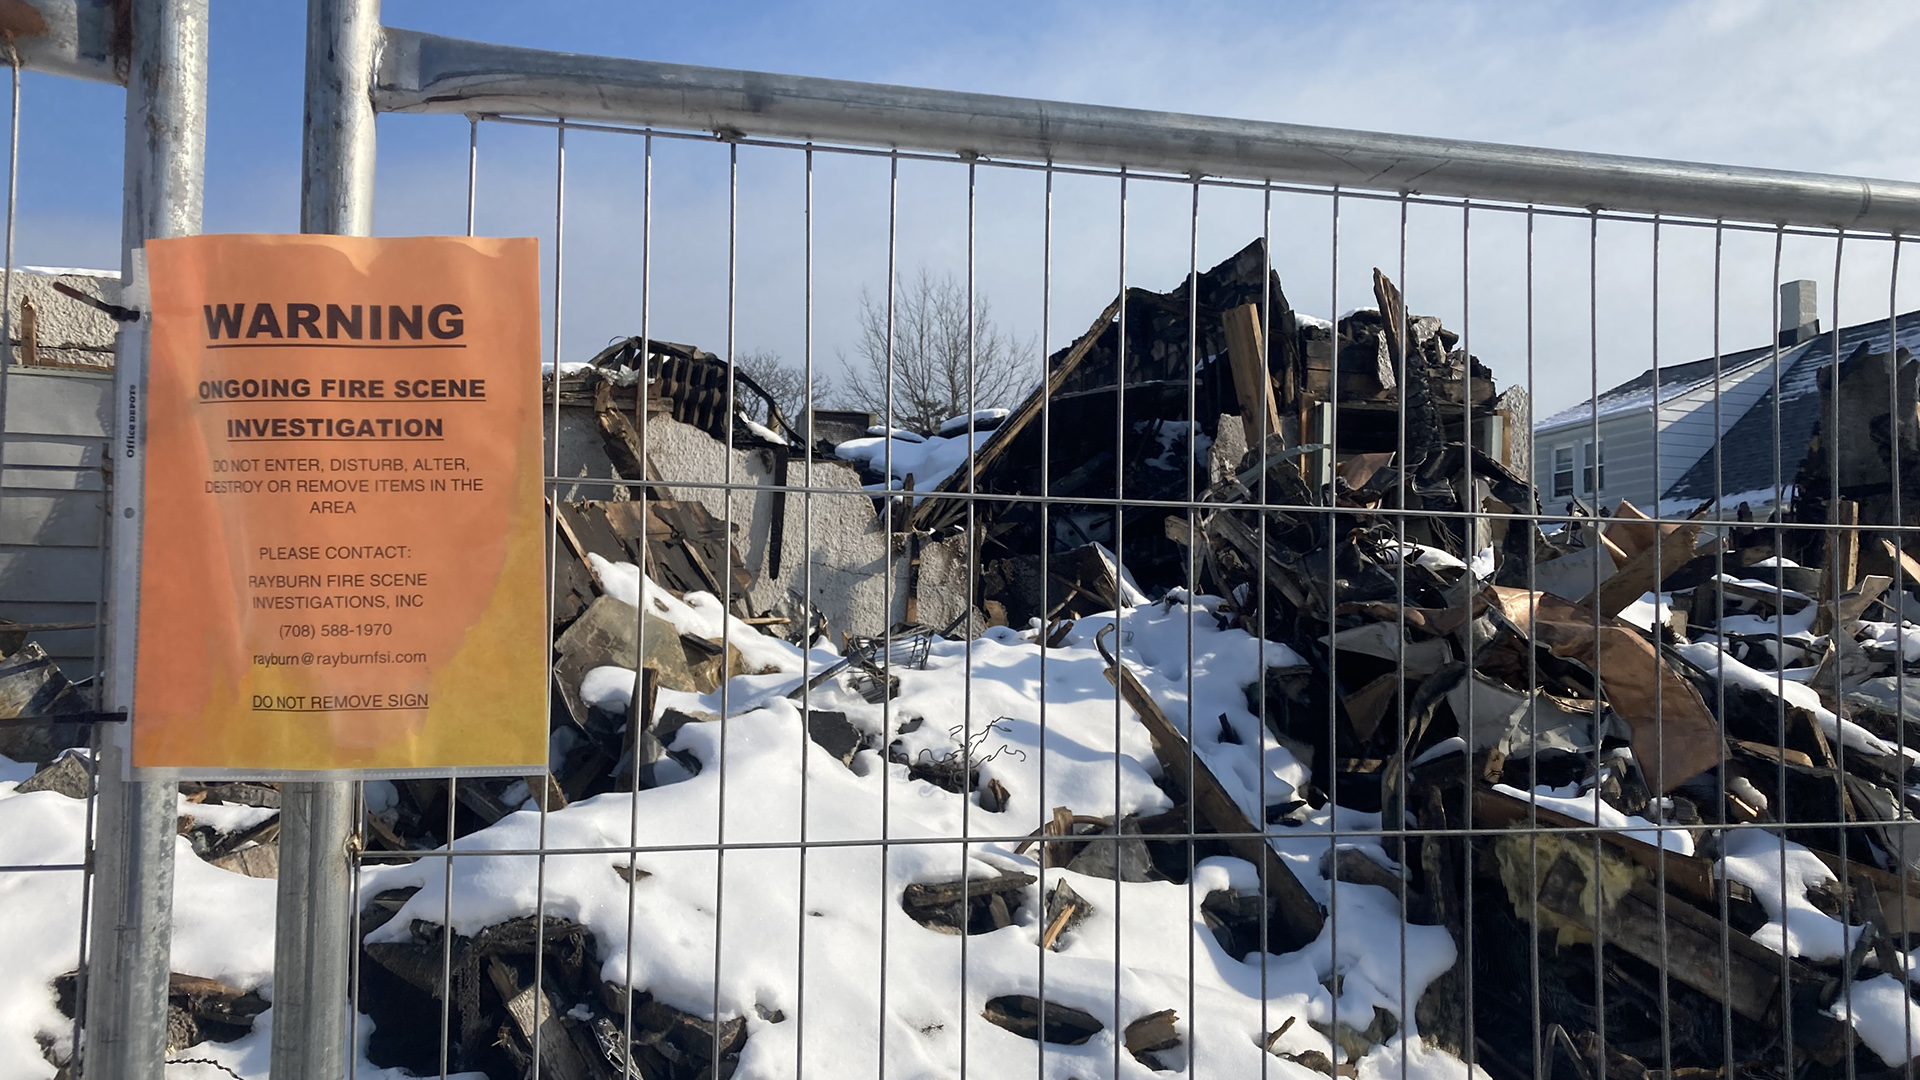 A paper sign that reads "Warning" and "Ongoing Fire Scene Investigation" is posted to a metal fence in front of a snow-covered pile of charred rubble, with other buildings standing in the background.